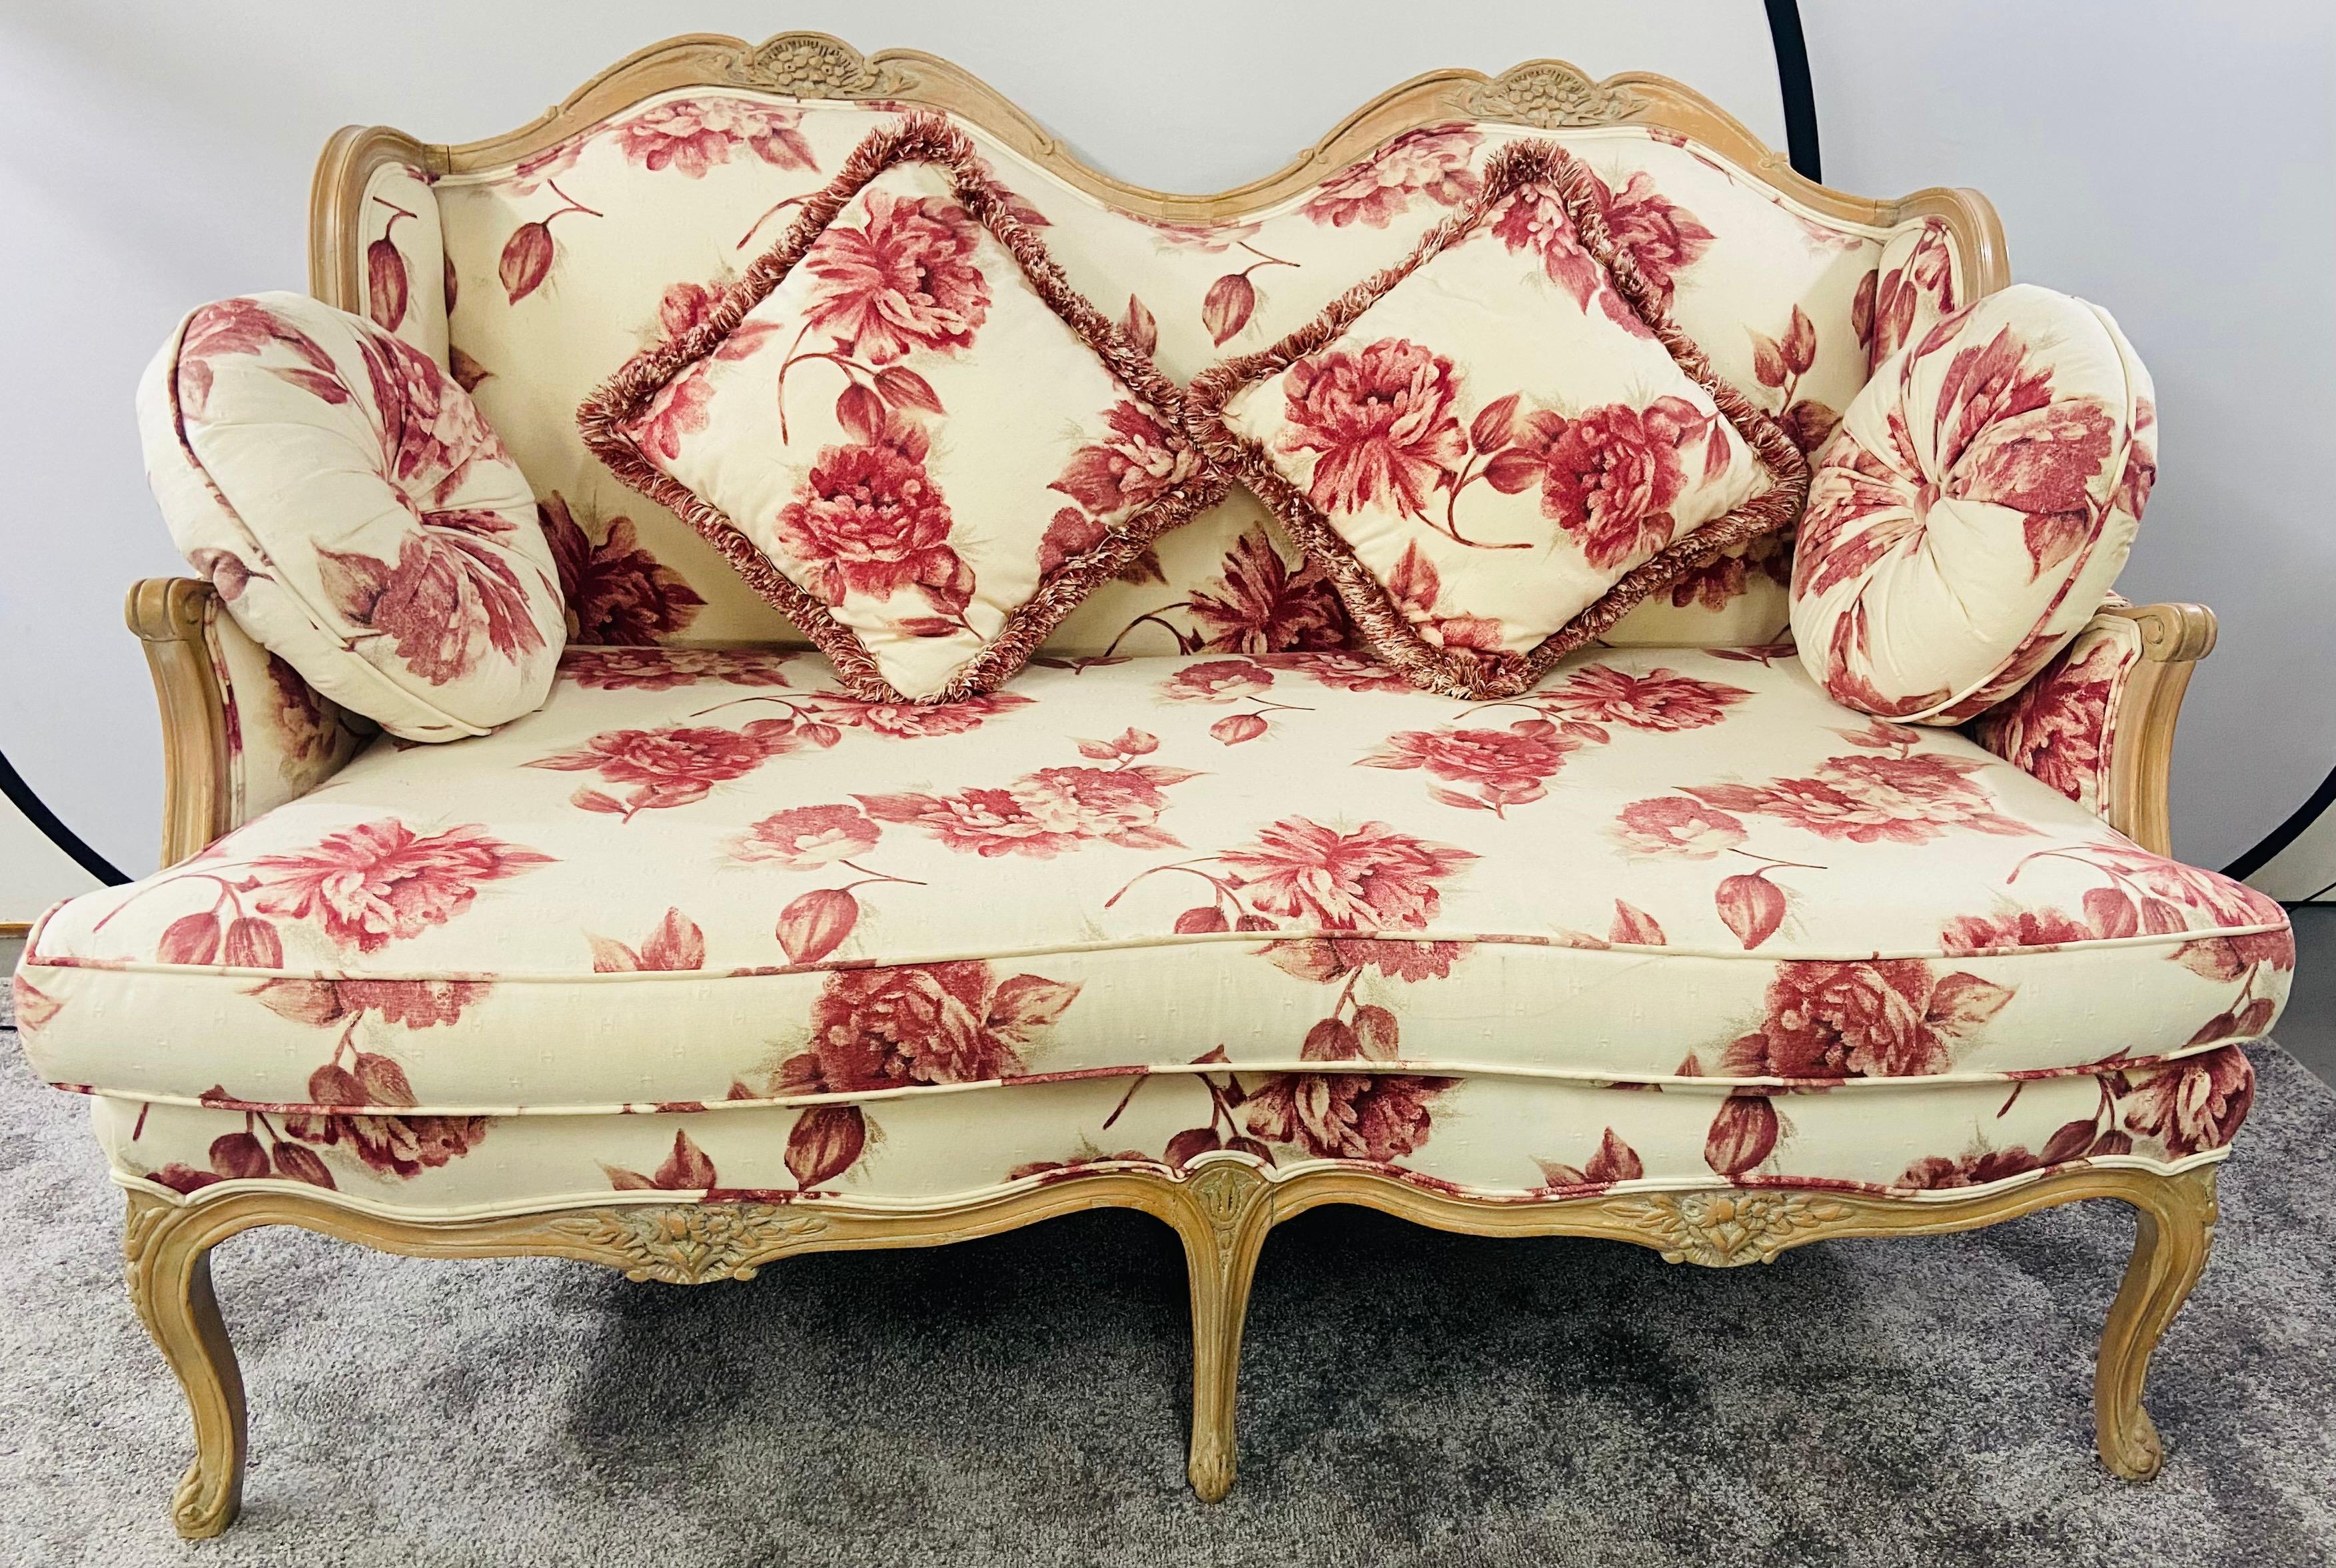 French Louis XV Style Settee or Canape with Floral Upholstery in Red & White In Good Condition For Sale In Plainview, NY